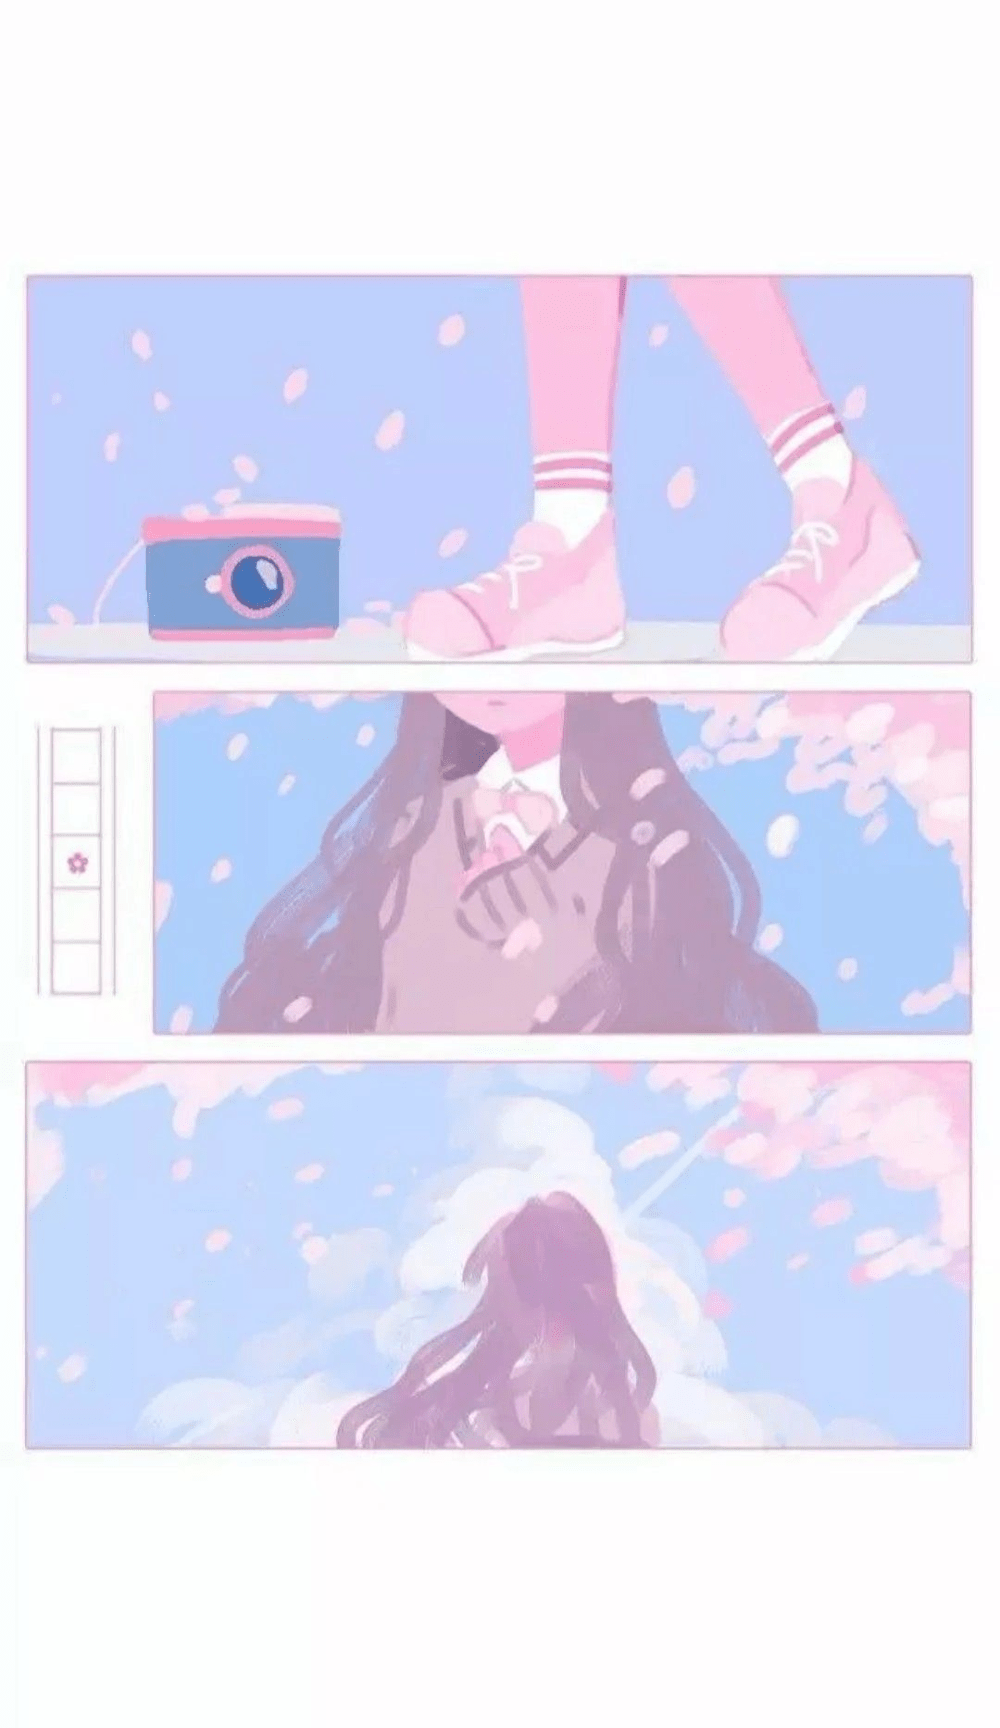 Download An Anime Aesthetic with a Soft Pink Glow  Wallpaperscom